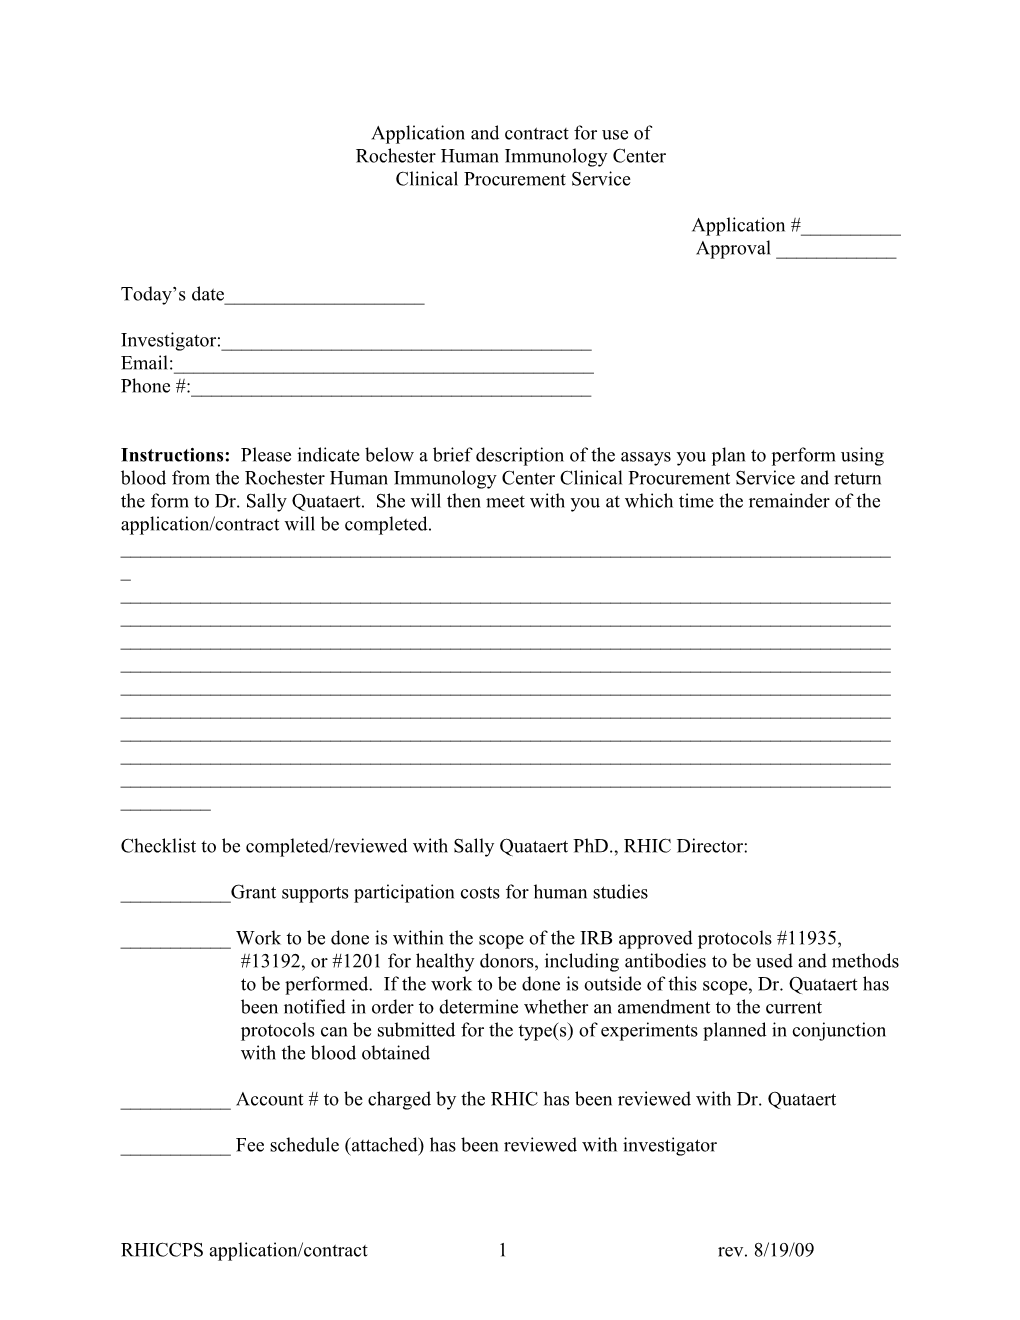 Application for Use of RHIC Phlebotomy Service